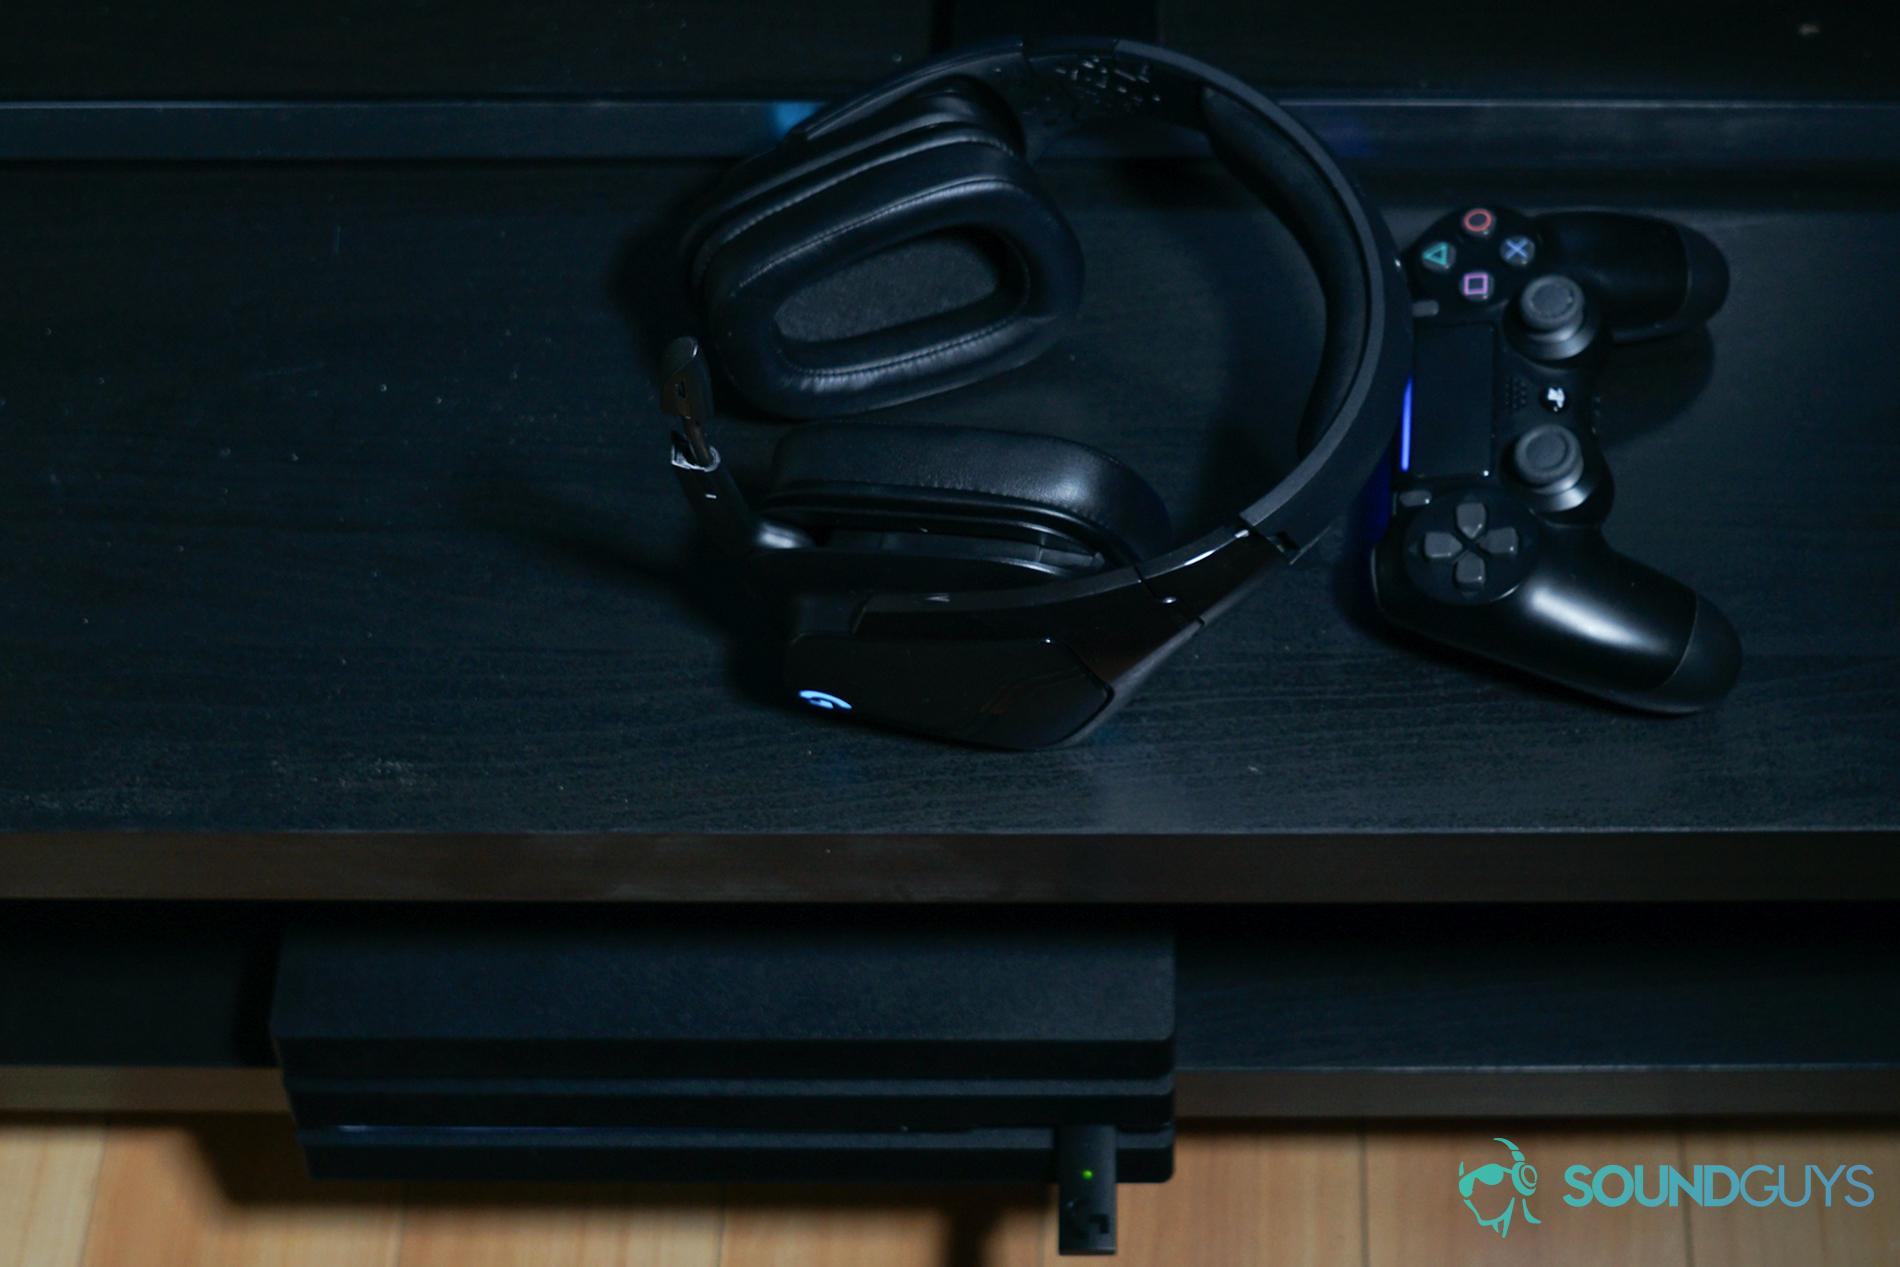 The Logitech G935 gaming headset sits on a black TV stand next to a Playstation 4 DualShock controller, above a Playstation 4